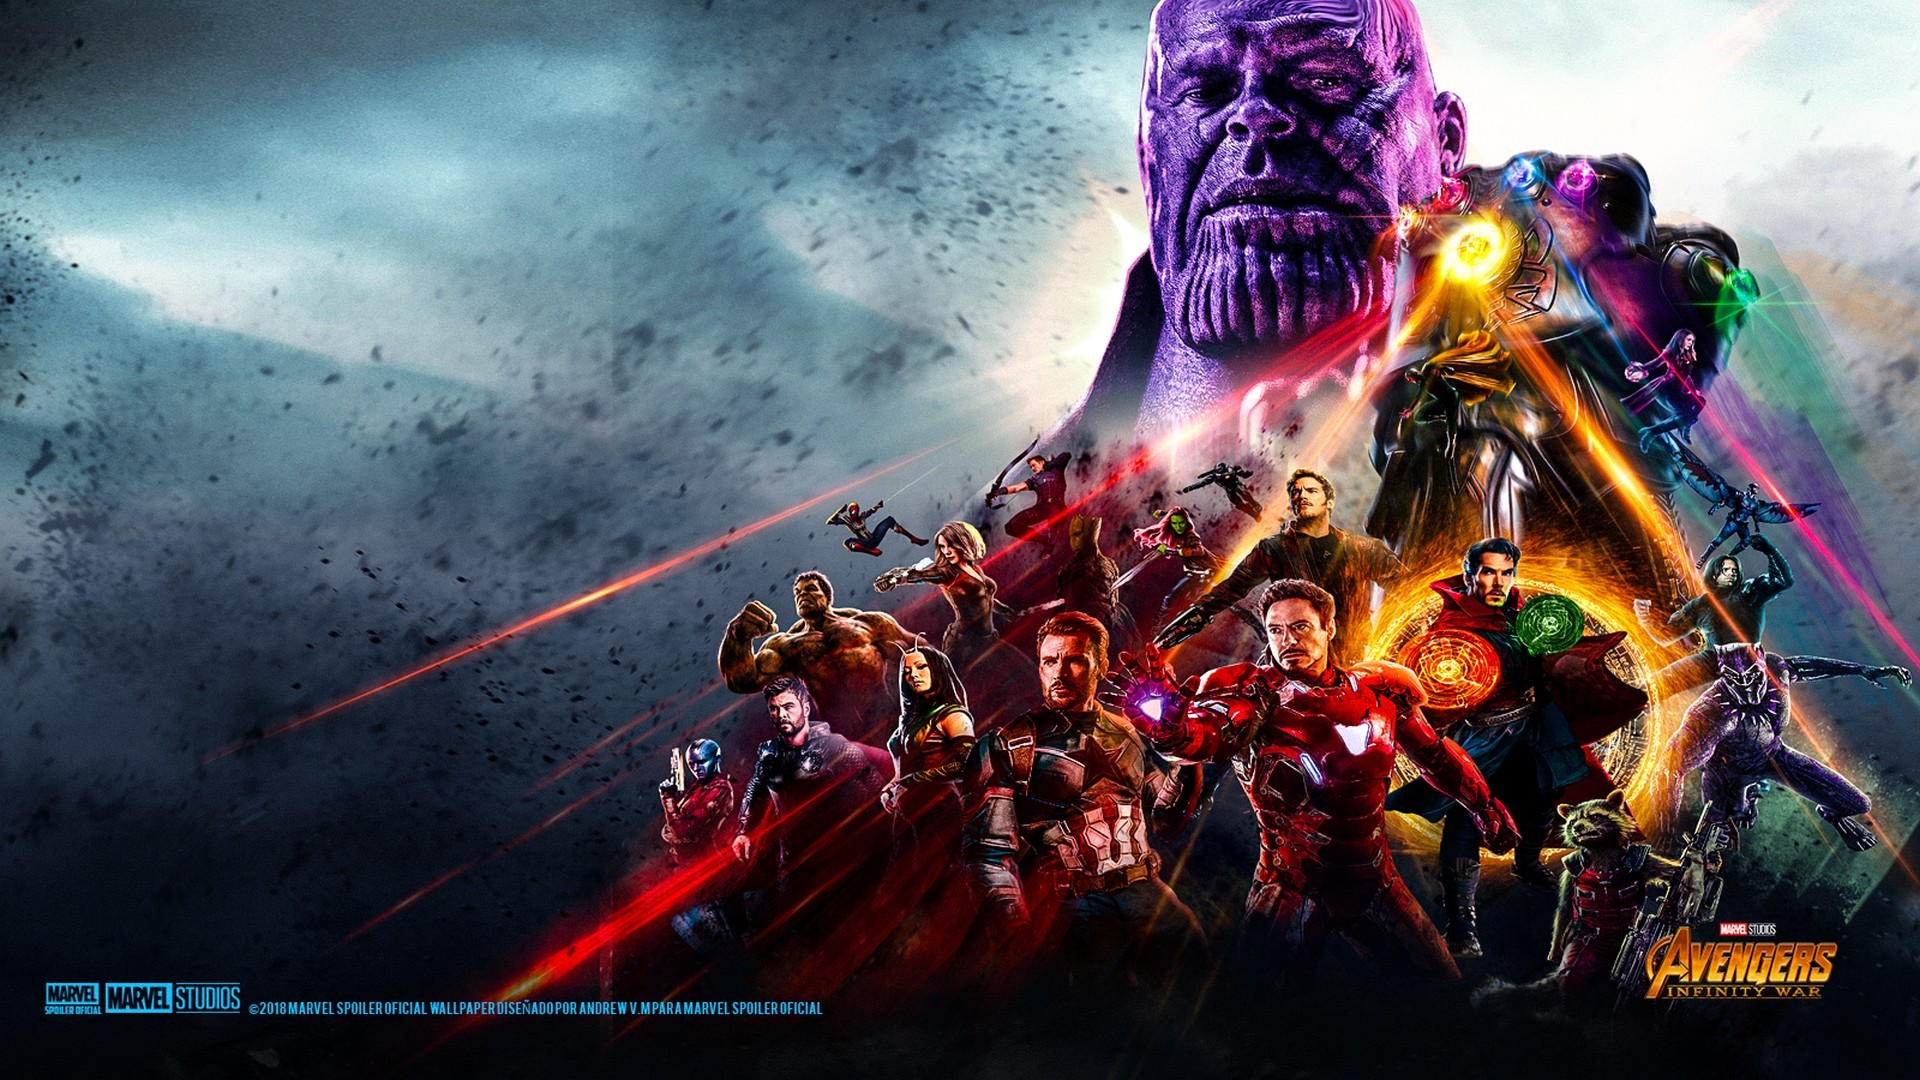 avengers wallpaper,action adventure game,pc game,cg artwork,games,fictional character